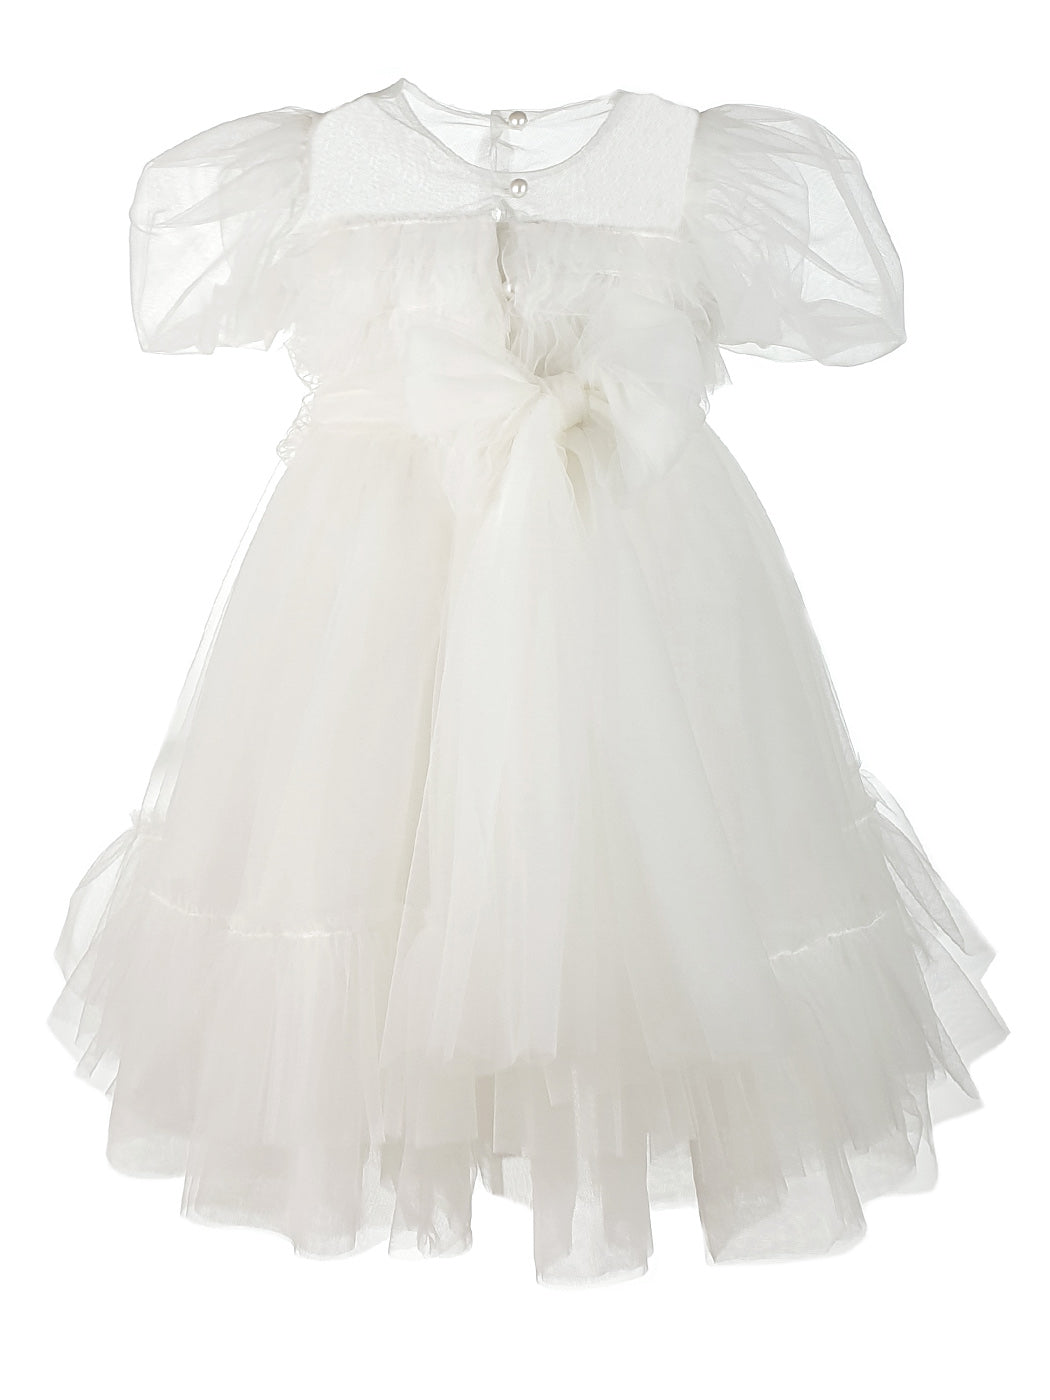 Baptism tulle Dress with gigot sleeve - RICH White